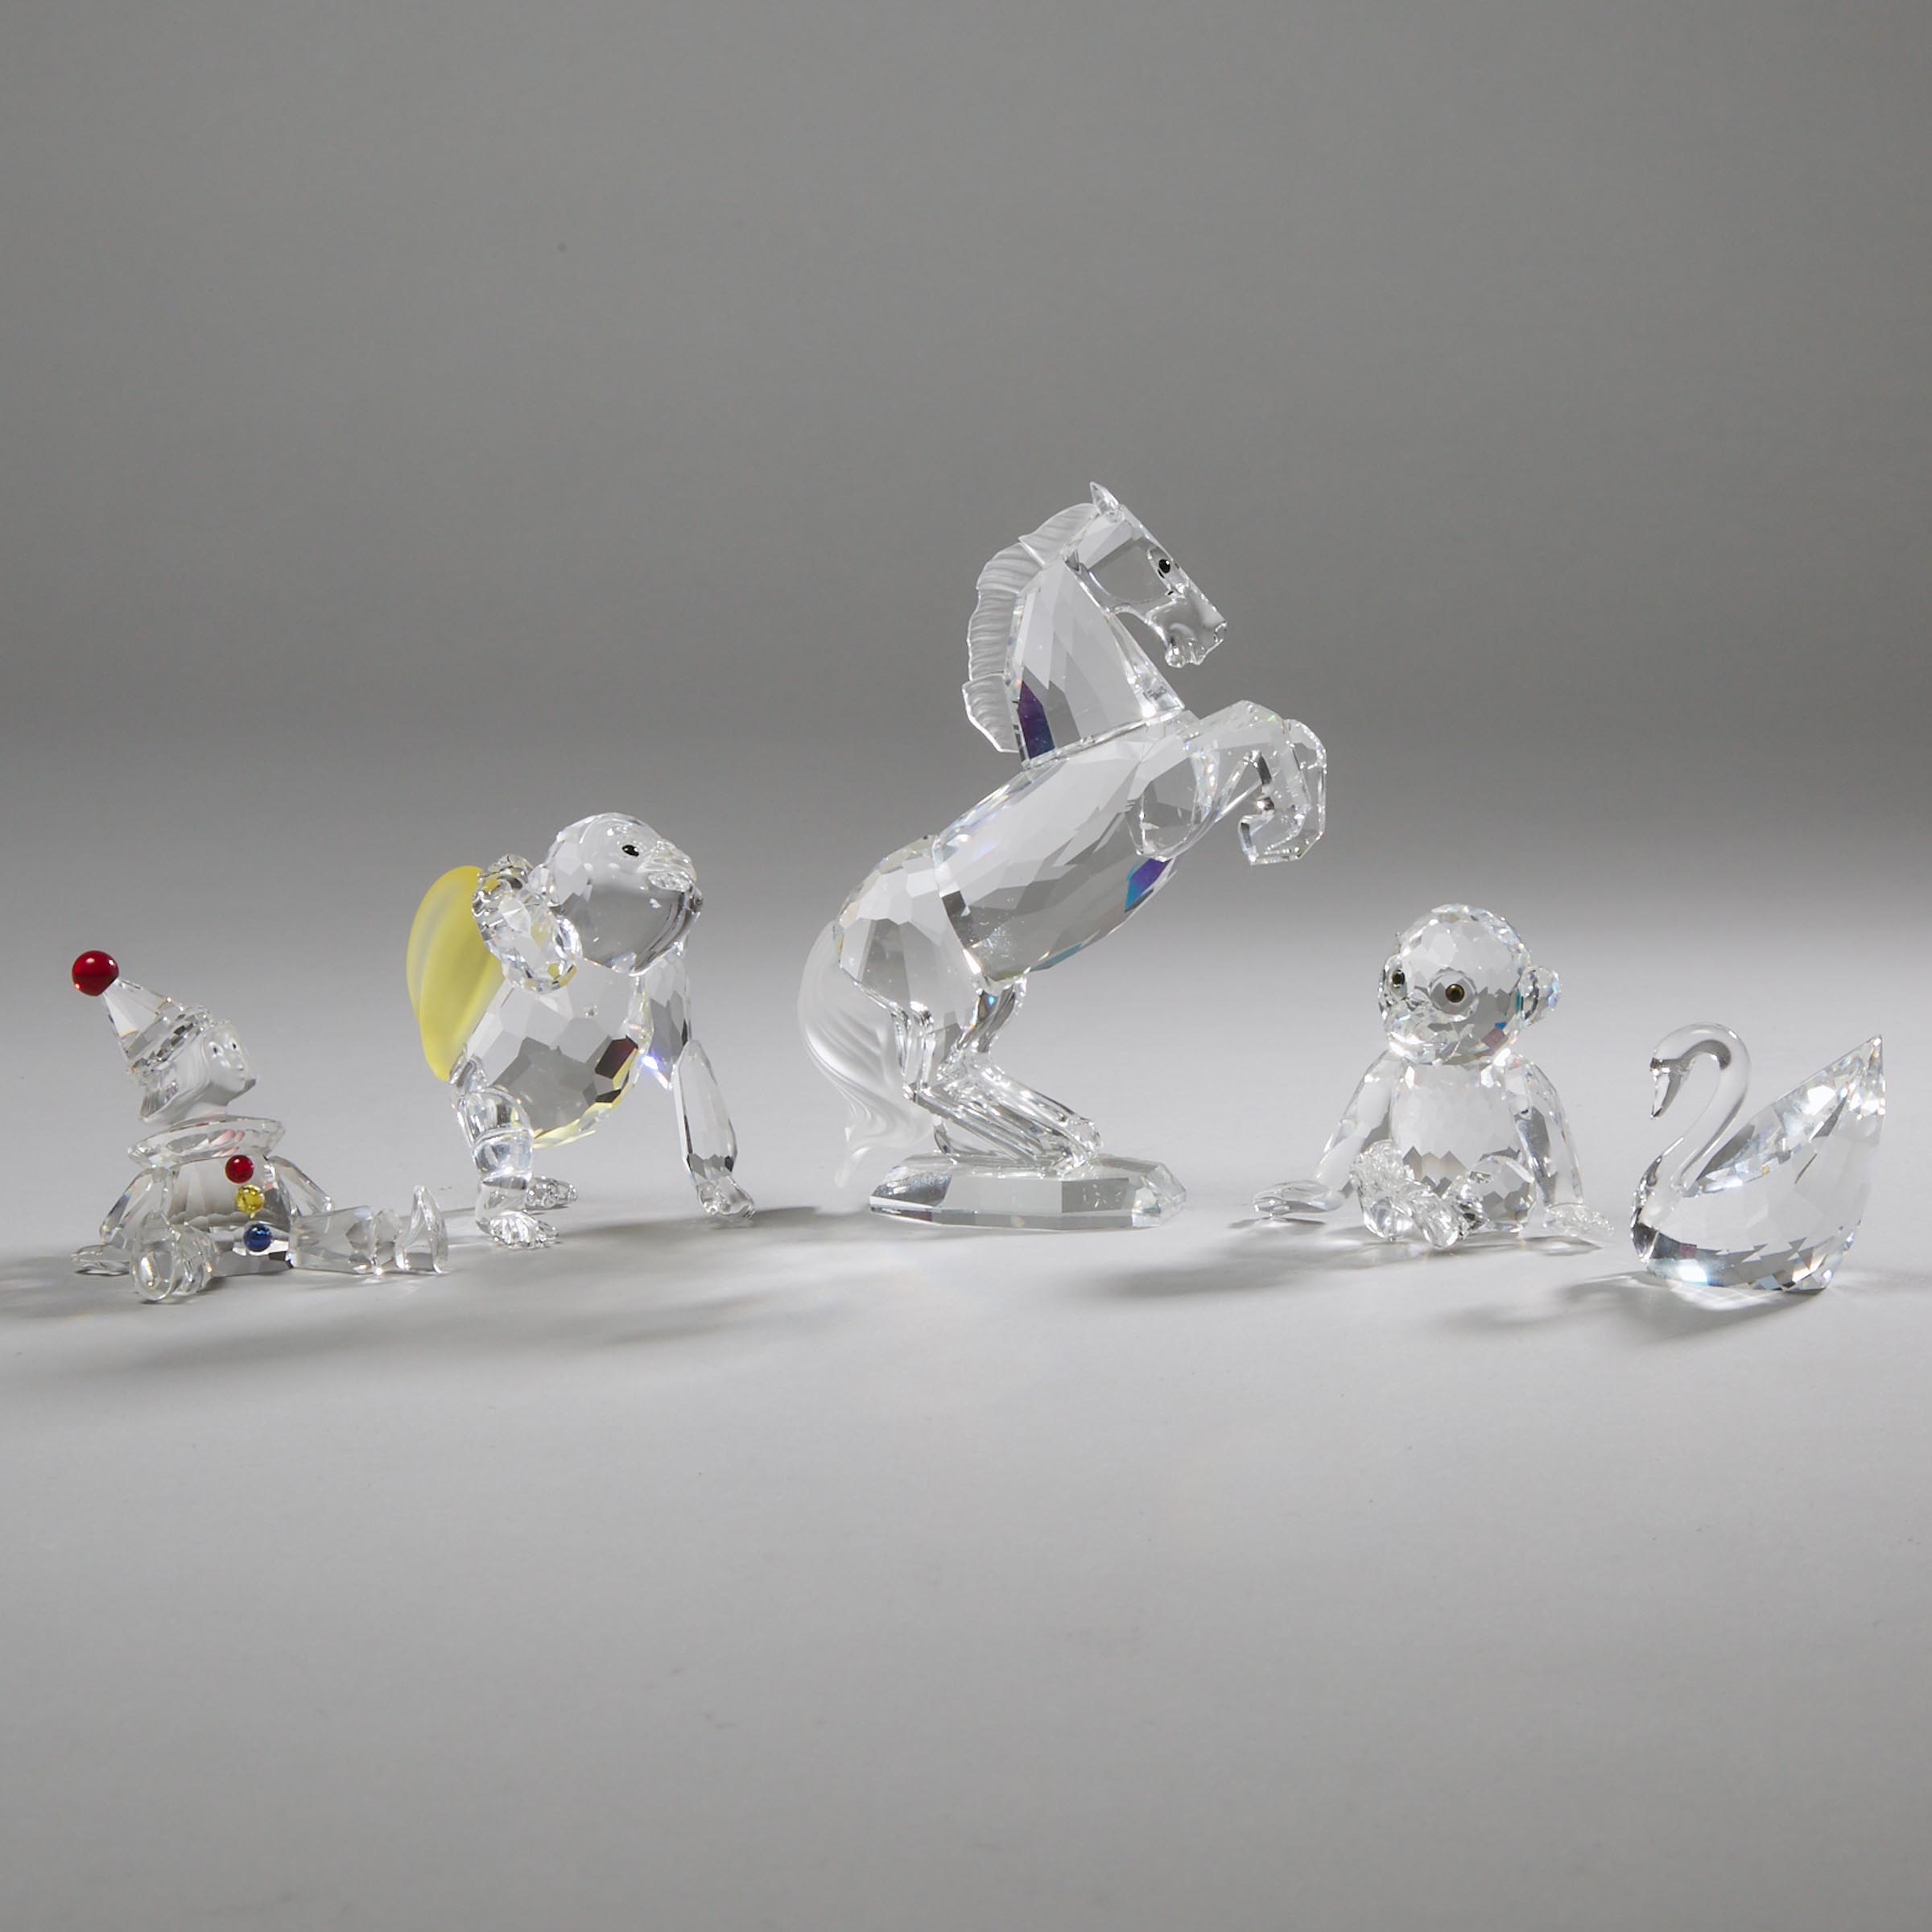 Five Swarovski Crystal Figurines, late 20th/early 21st century